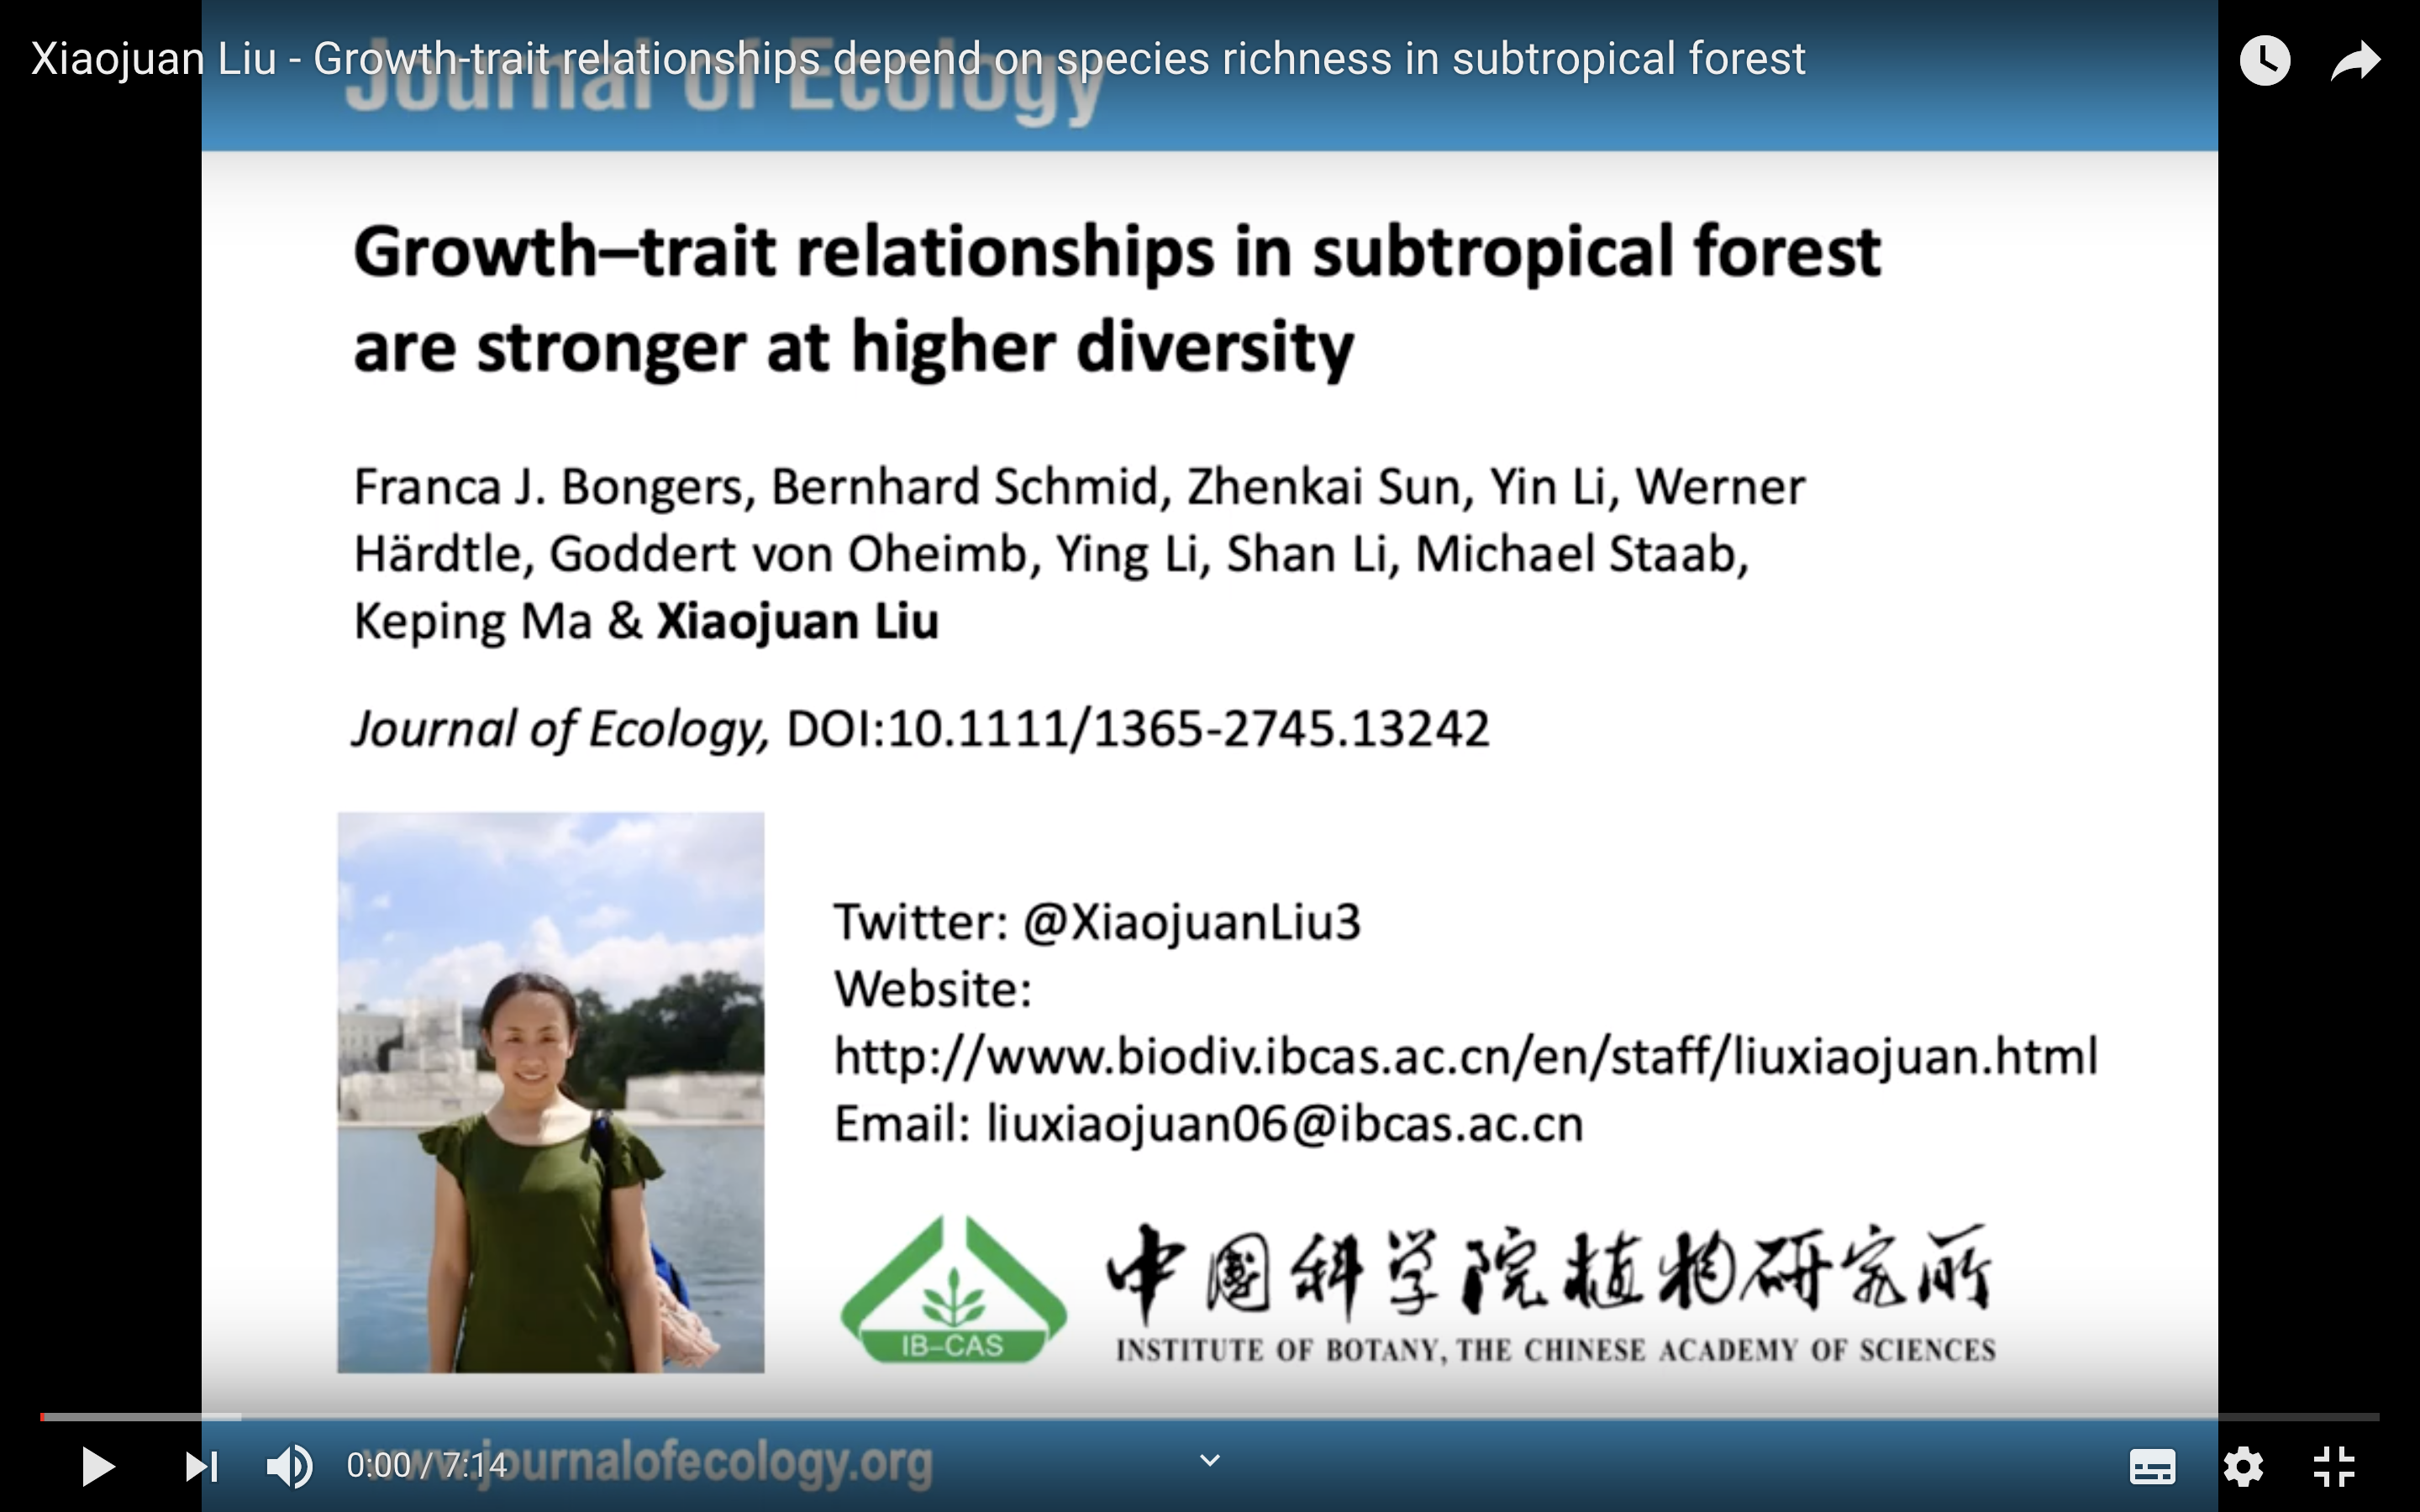 Growth-trait relationships depend on species richness in subtropical forest